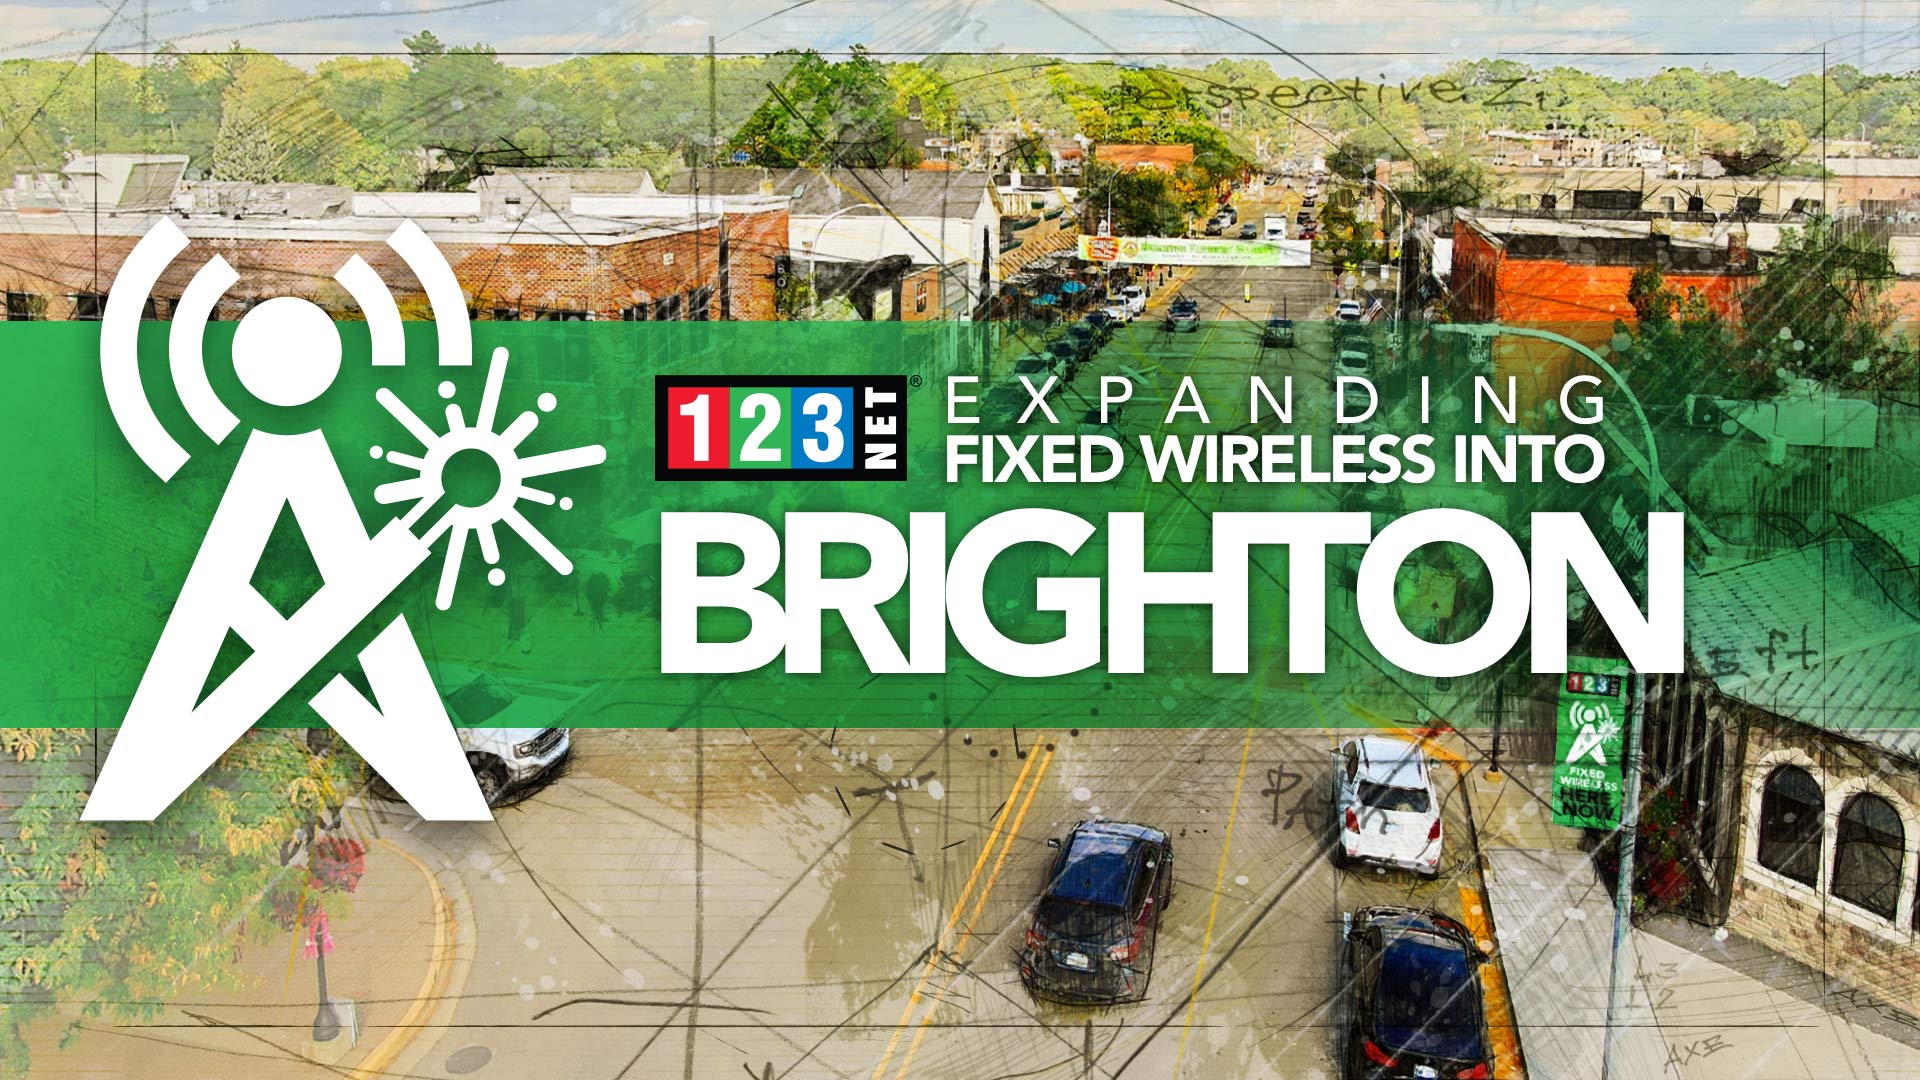 123NET Expands Fixed Wireless Coverage to Brighton